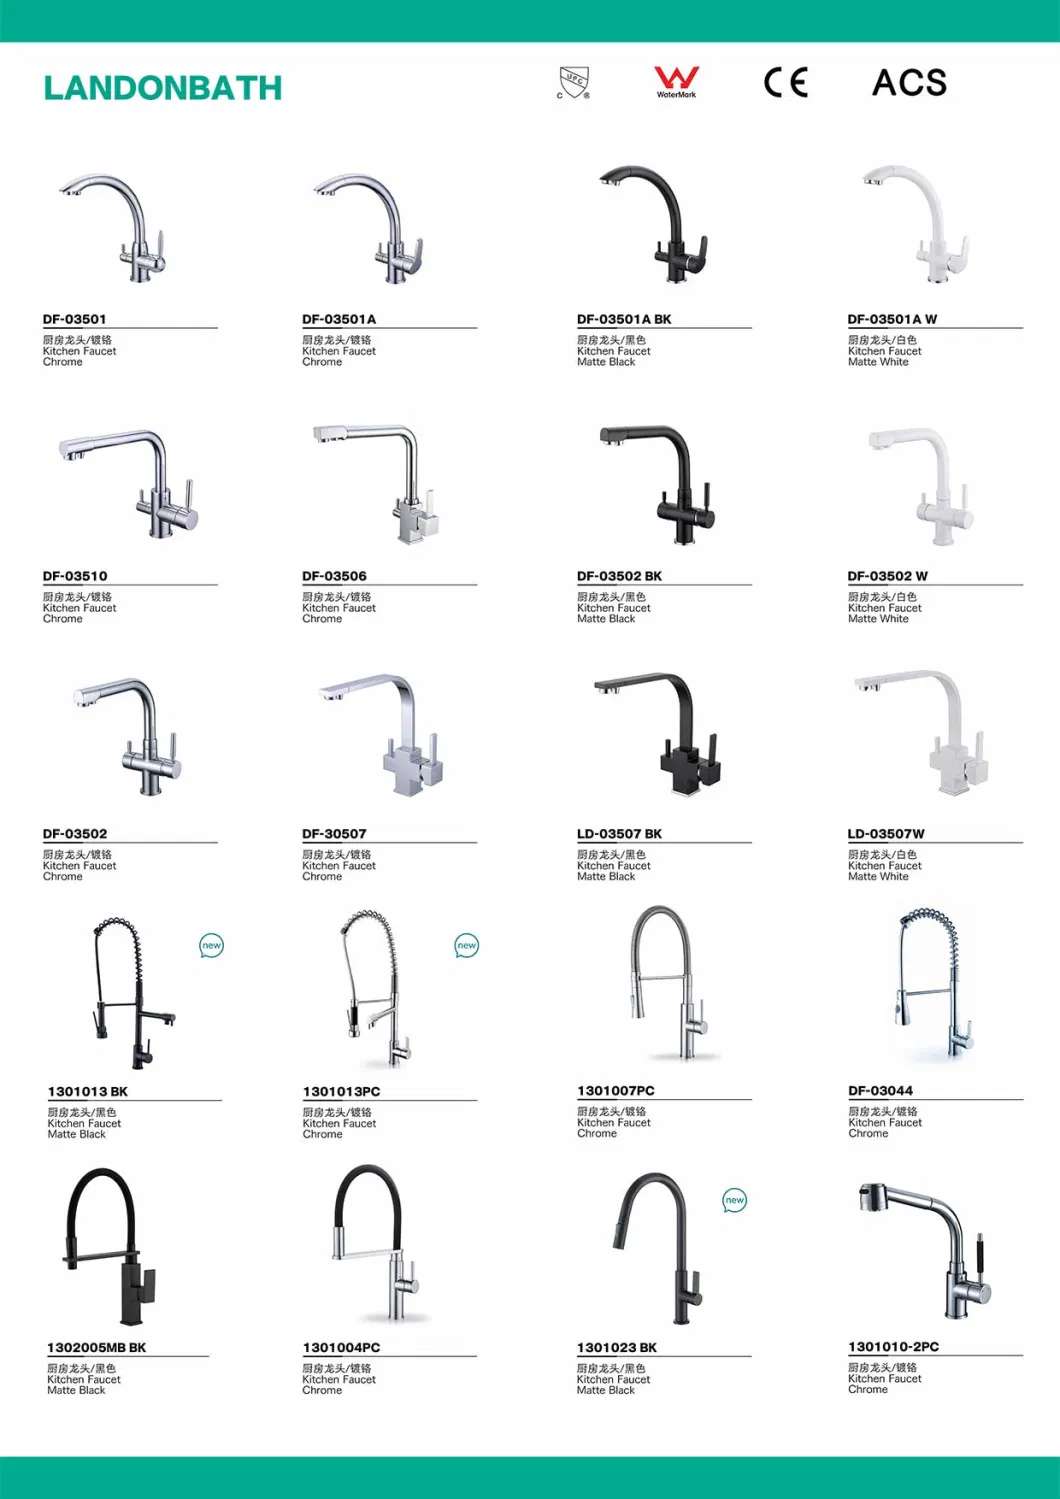 High Quality Single Hole Commercial Kitchen Sink Faucet Tap Pre Rinse Watermark Easyinstall Mini Pre-Rinse Units